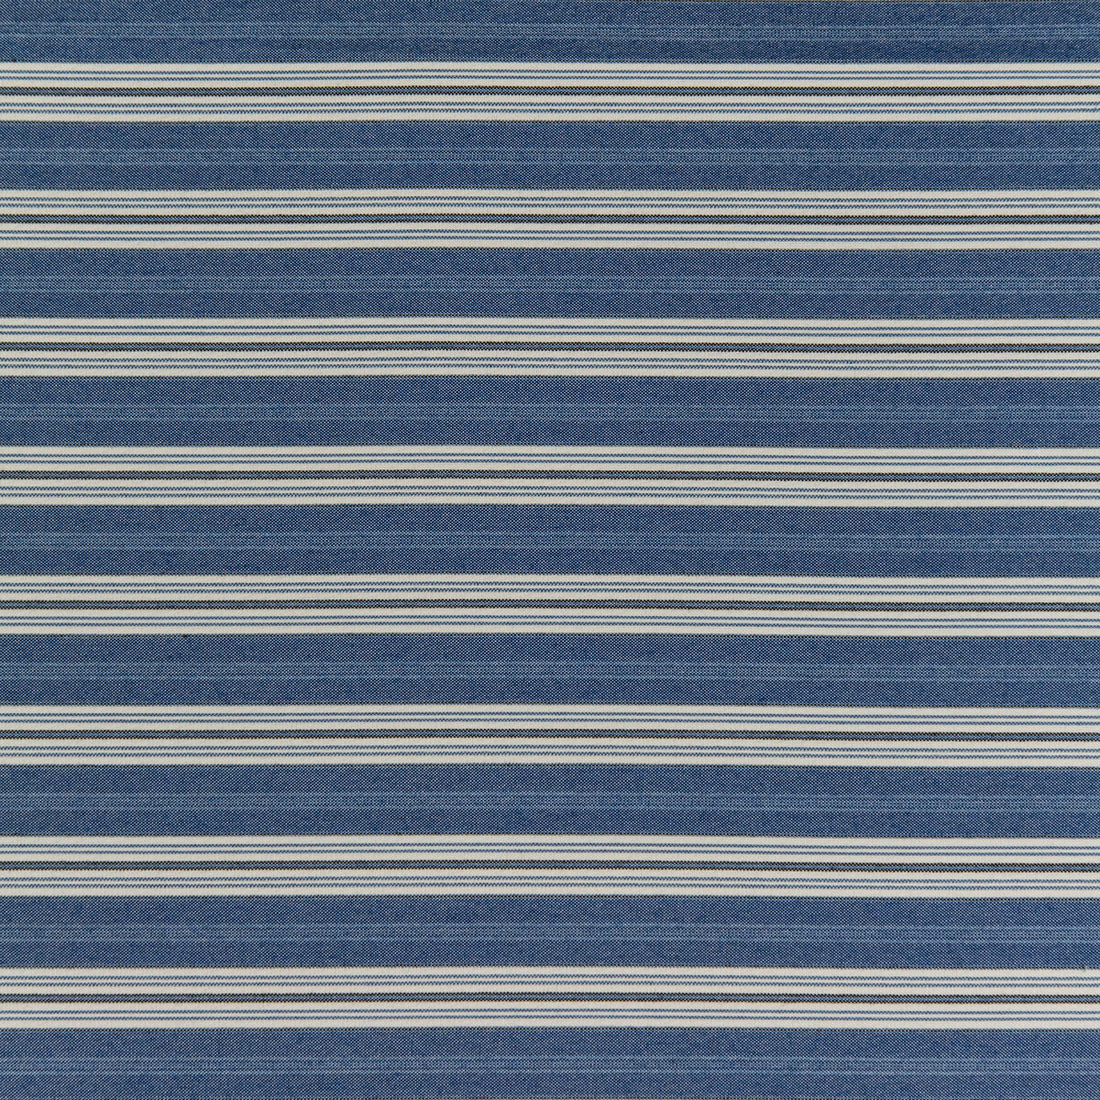 Hull Stripe fabric in marine color - pattern 35827.50.0 - by Kravet Design in the Indoor / Outdoor collection